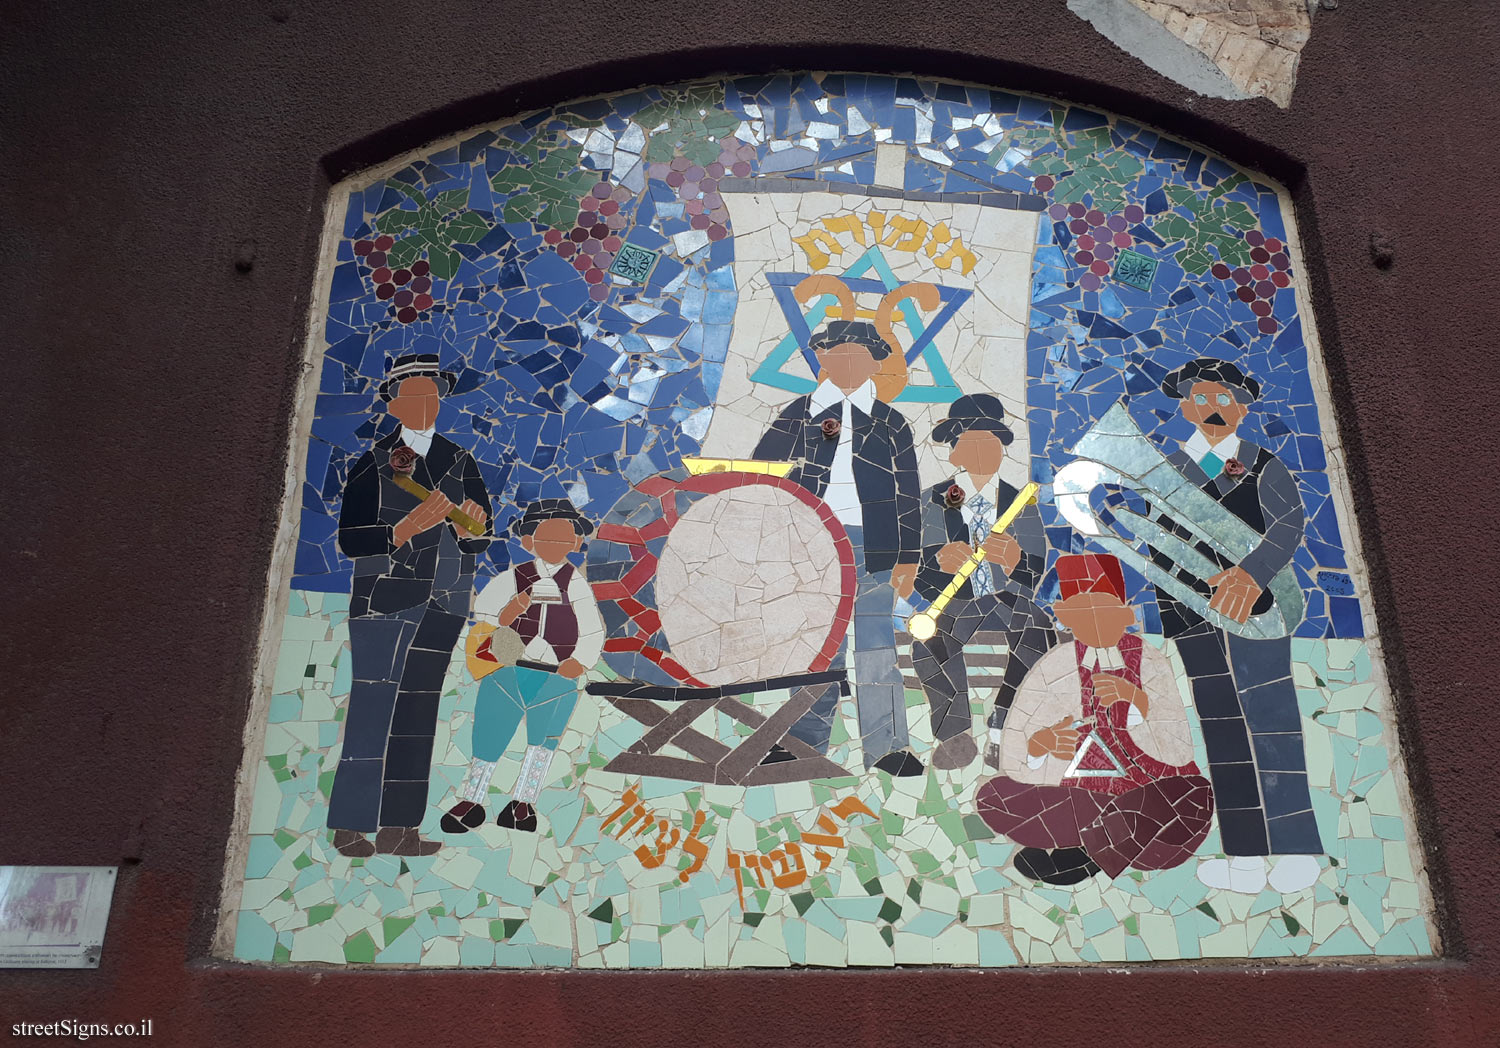 Rishon LeZion - In Mosaics - Roshon Le-Zion Orchestra playing in Rehovot